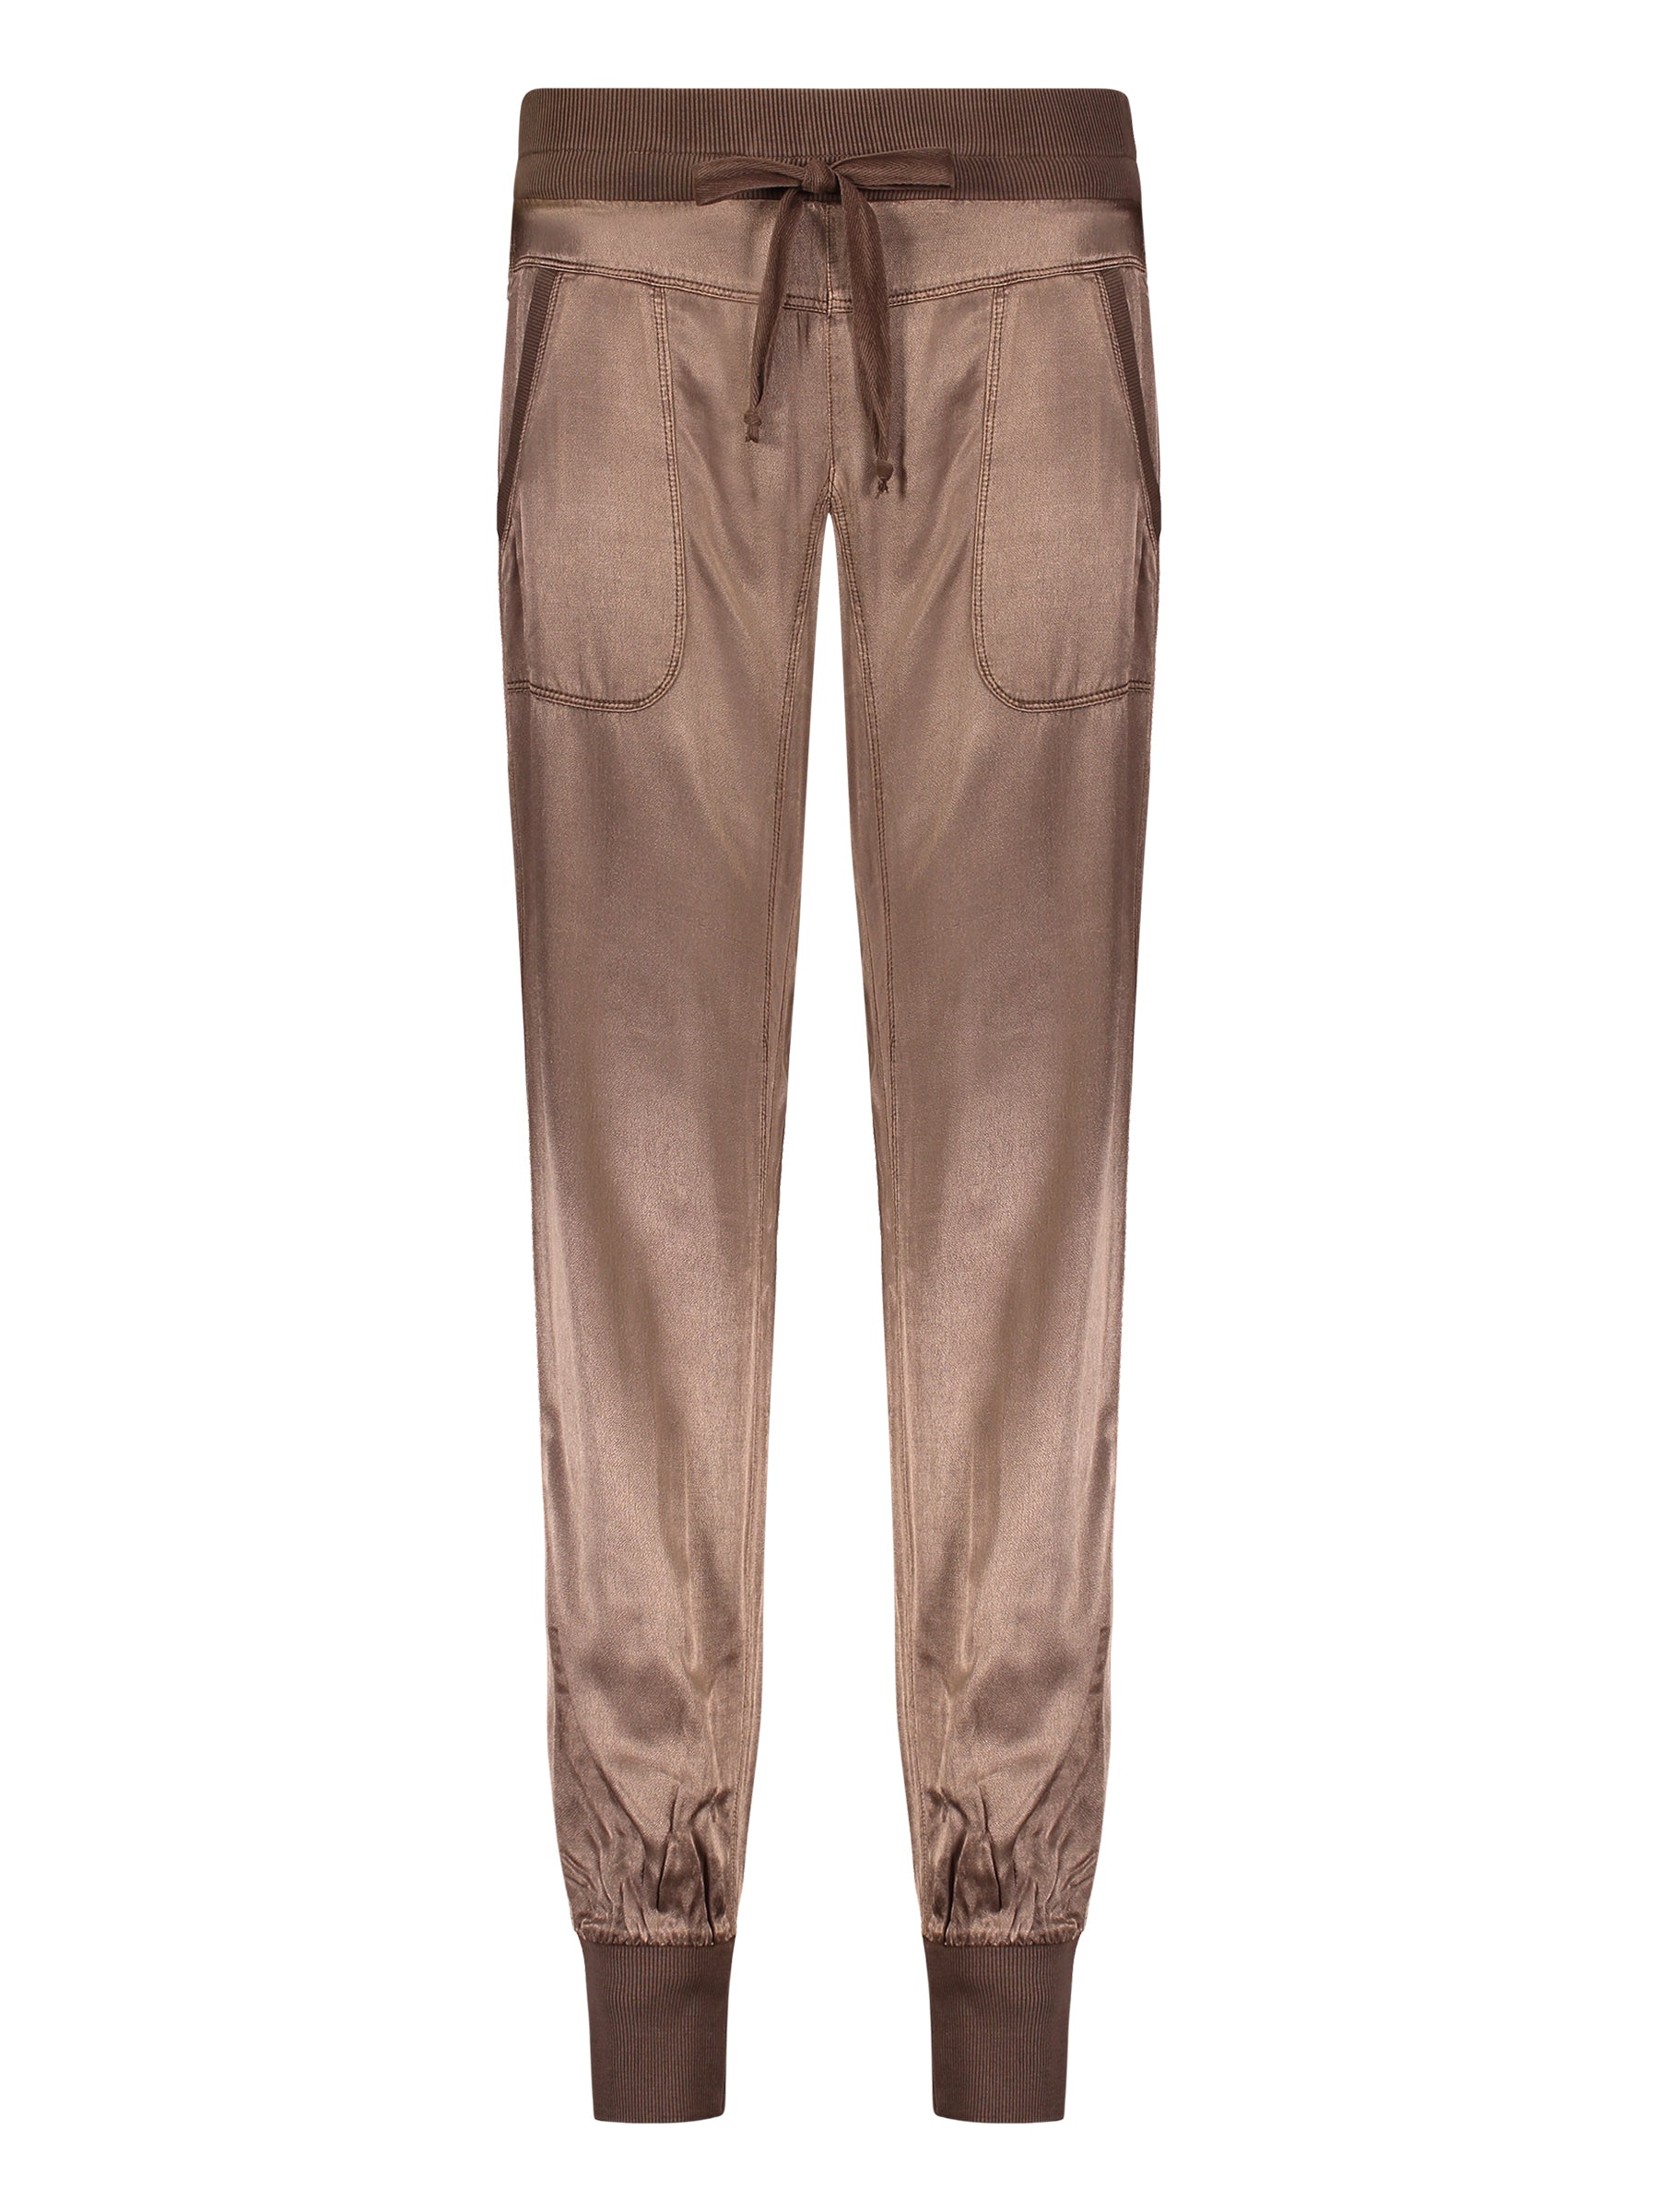 Liam Silky Joggers - Marrakech Clothing